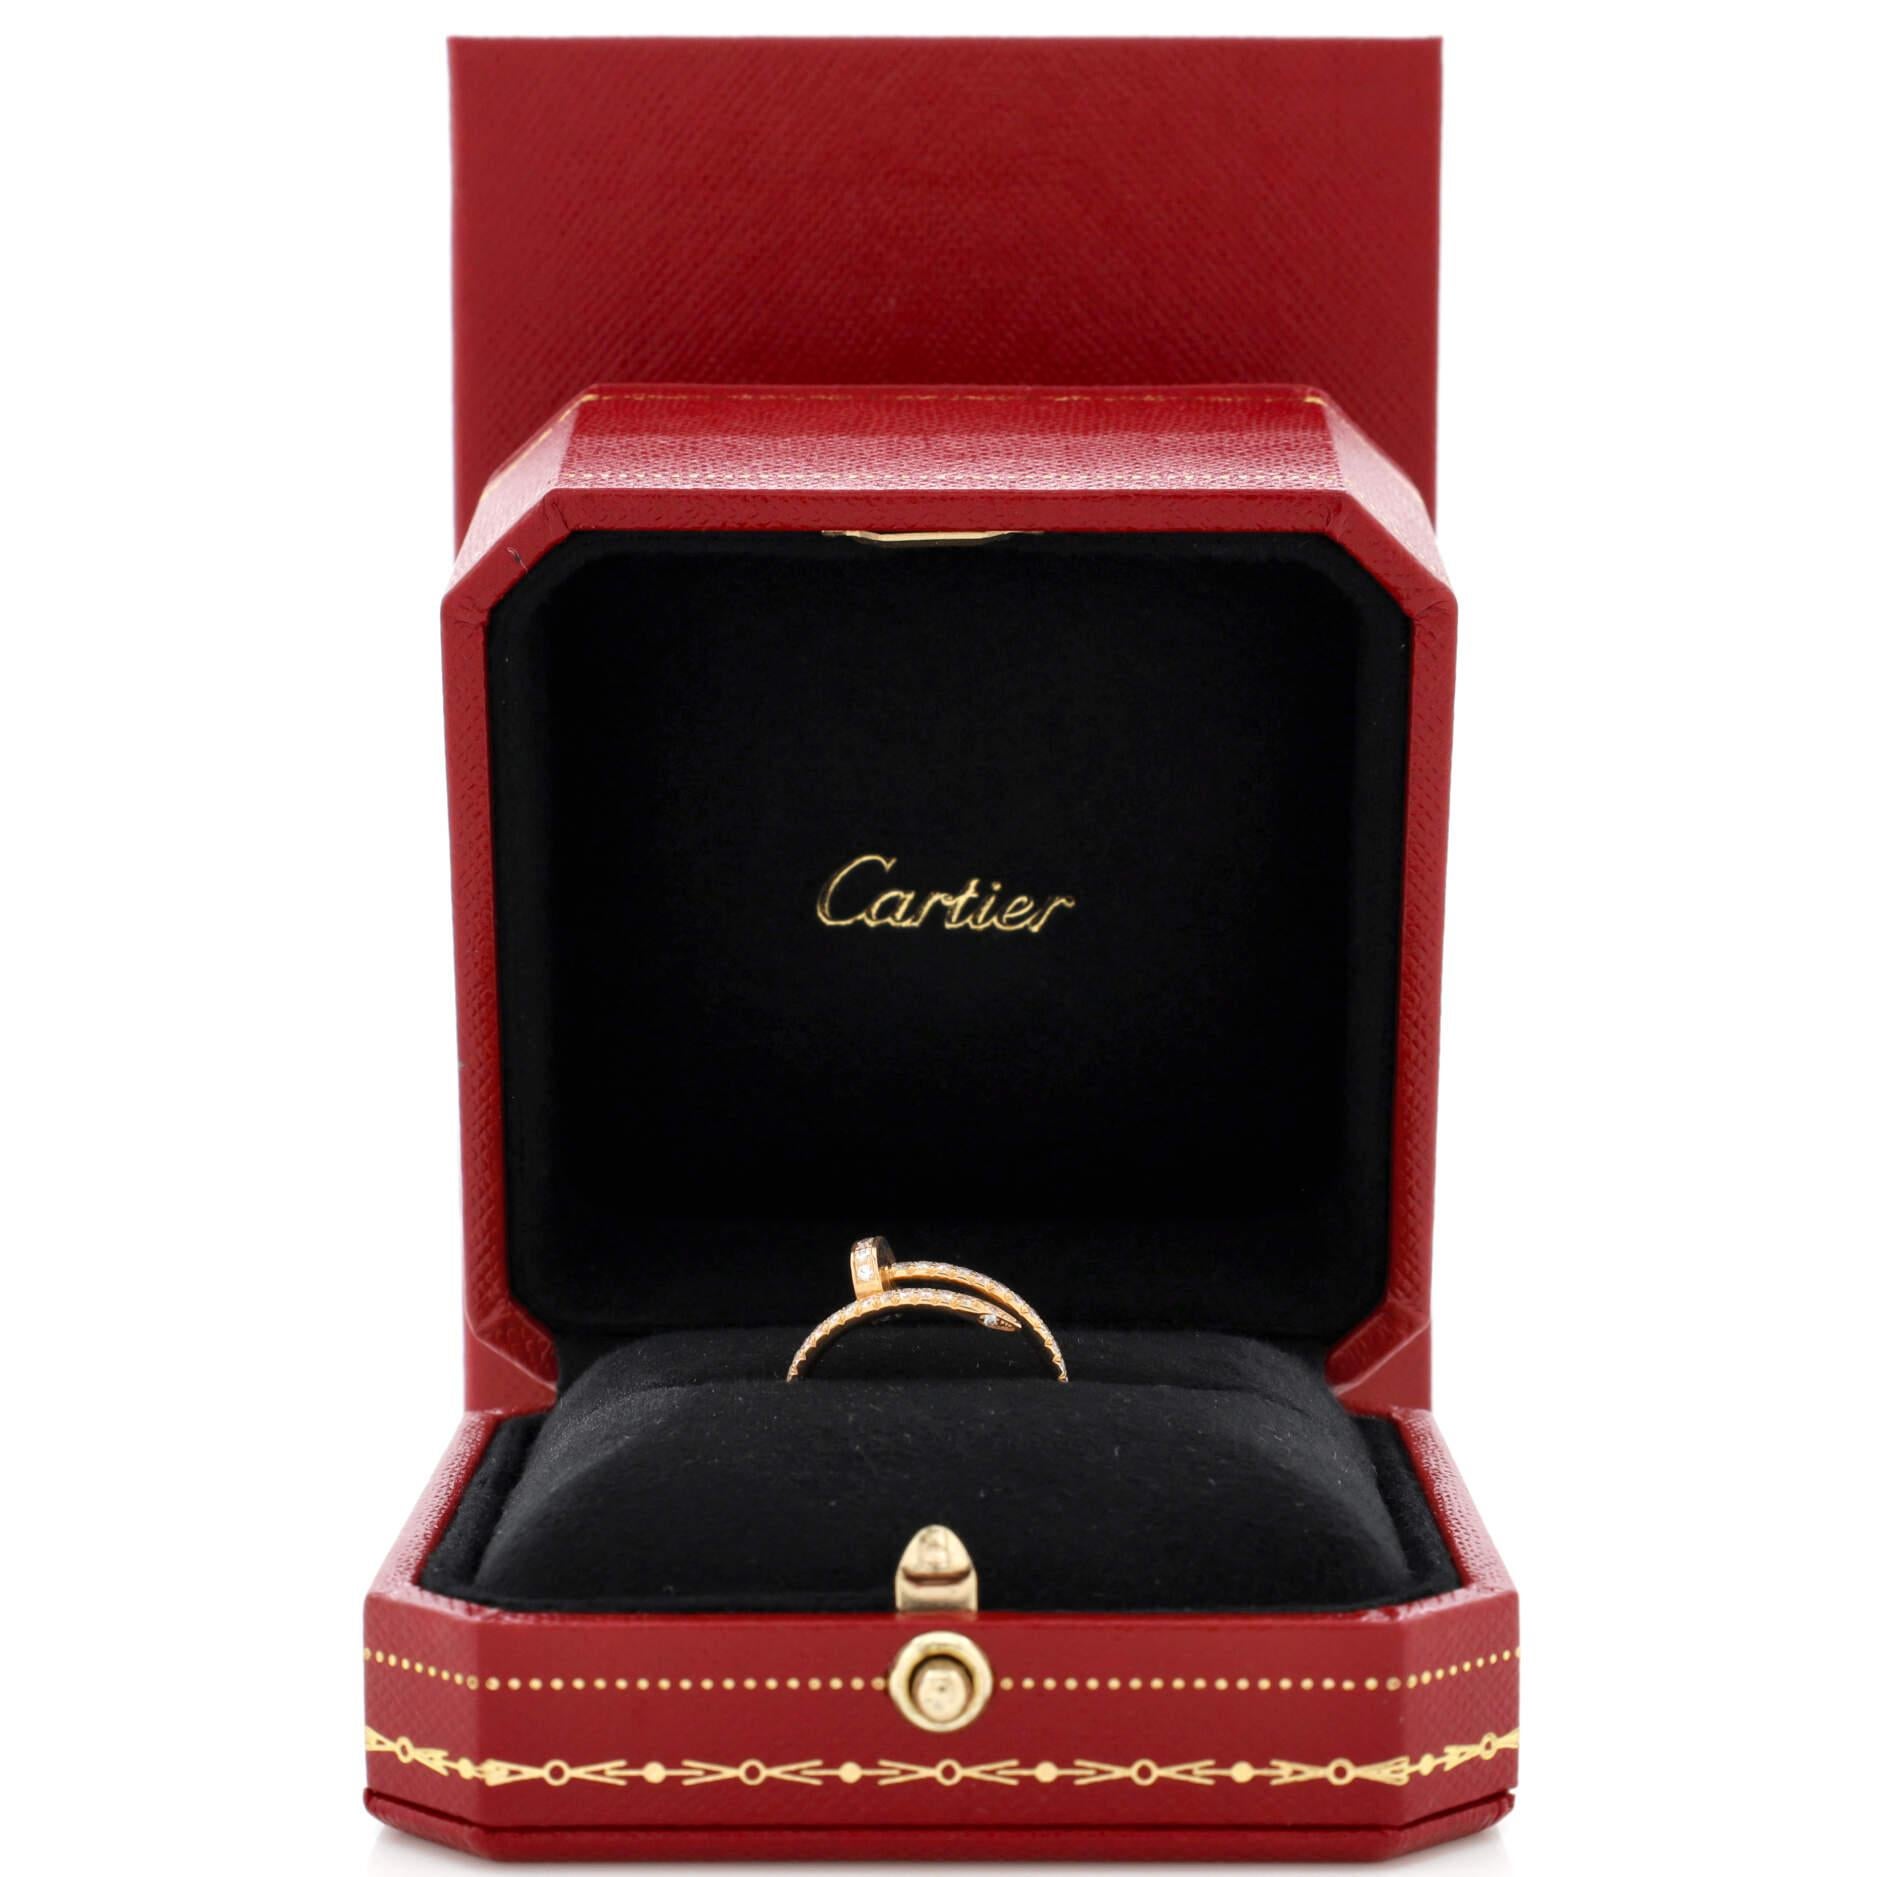 Condition: Great. Minor wear throughout.
Accessories:
Measurements: Size: 5.75 - 51, Width: 1.90 mm
Designer: Cartier
Model: Juste un Clou Paved Ring 18K Rose Gold with Diamonds Small
Exterior Color: Rose Gold
Item Number: 228648/1